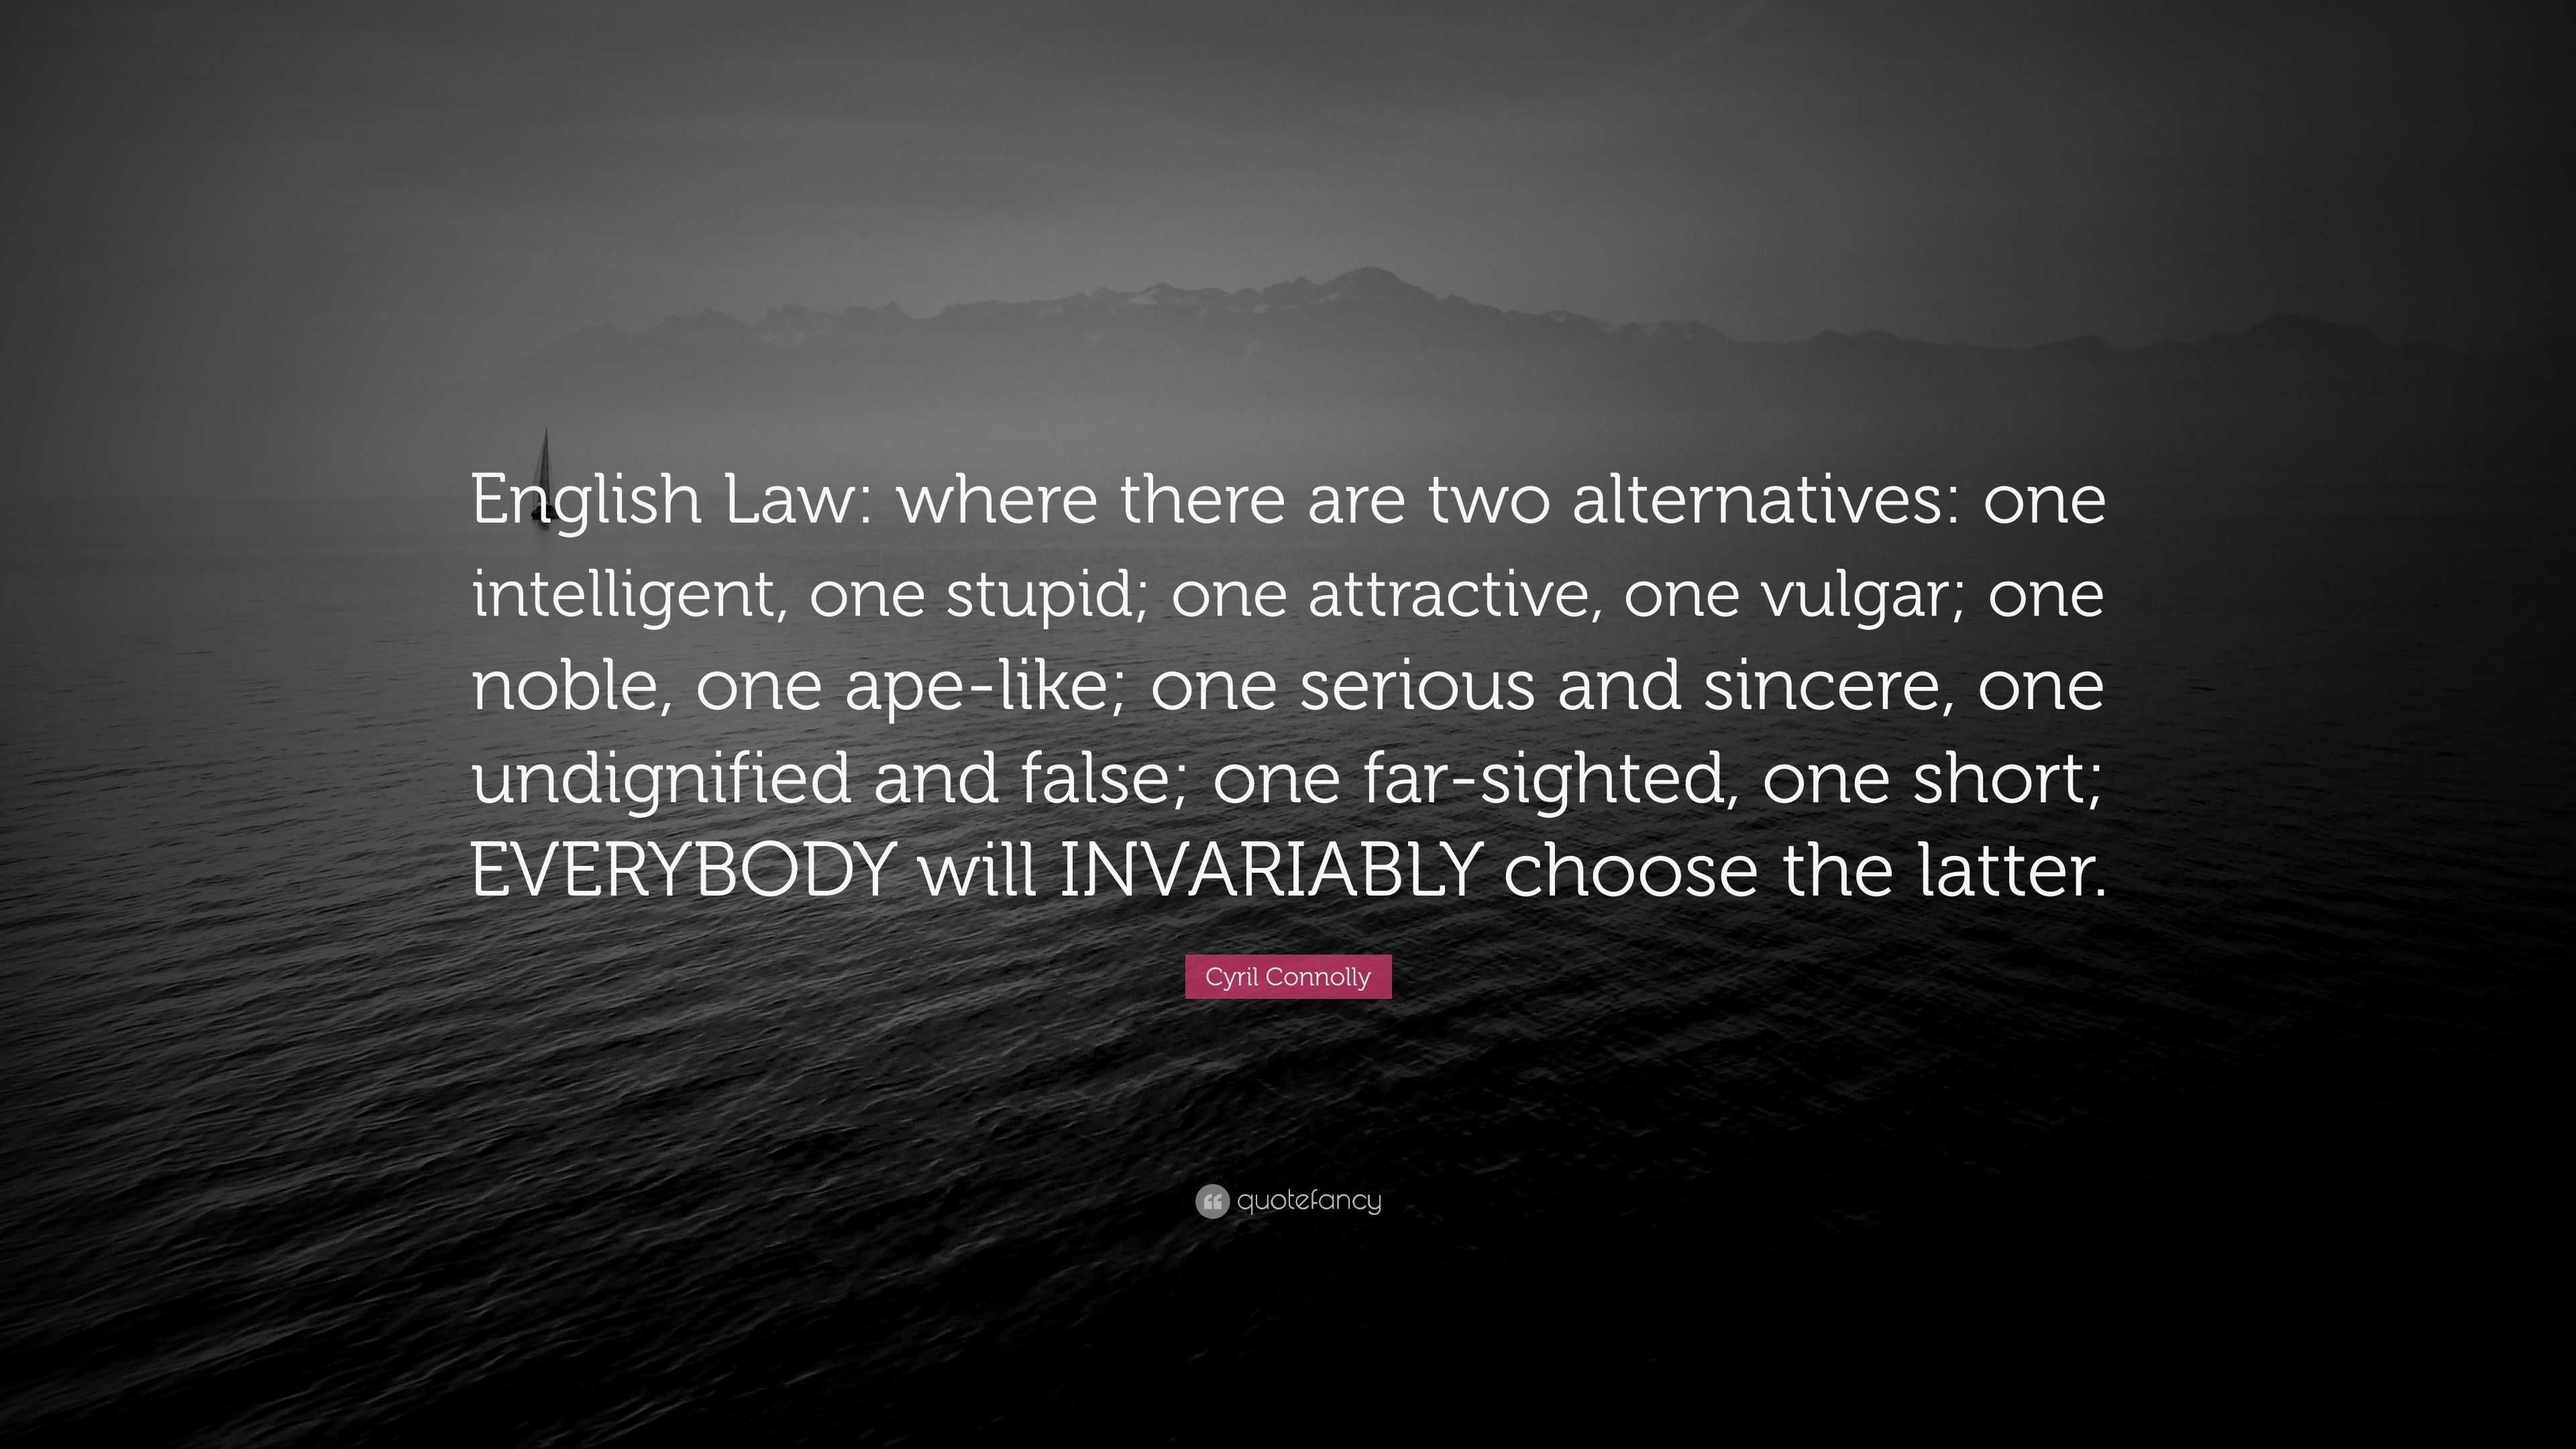 Cyril Connolly Quote “english Law Where There Are Two Alternatives One Intelligent One